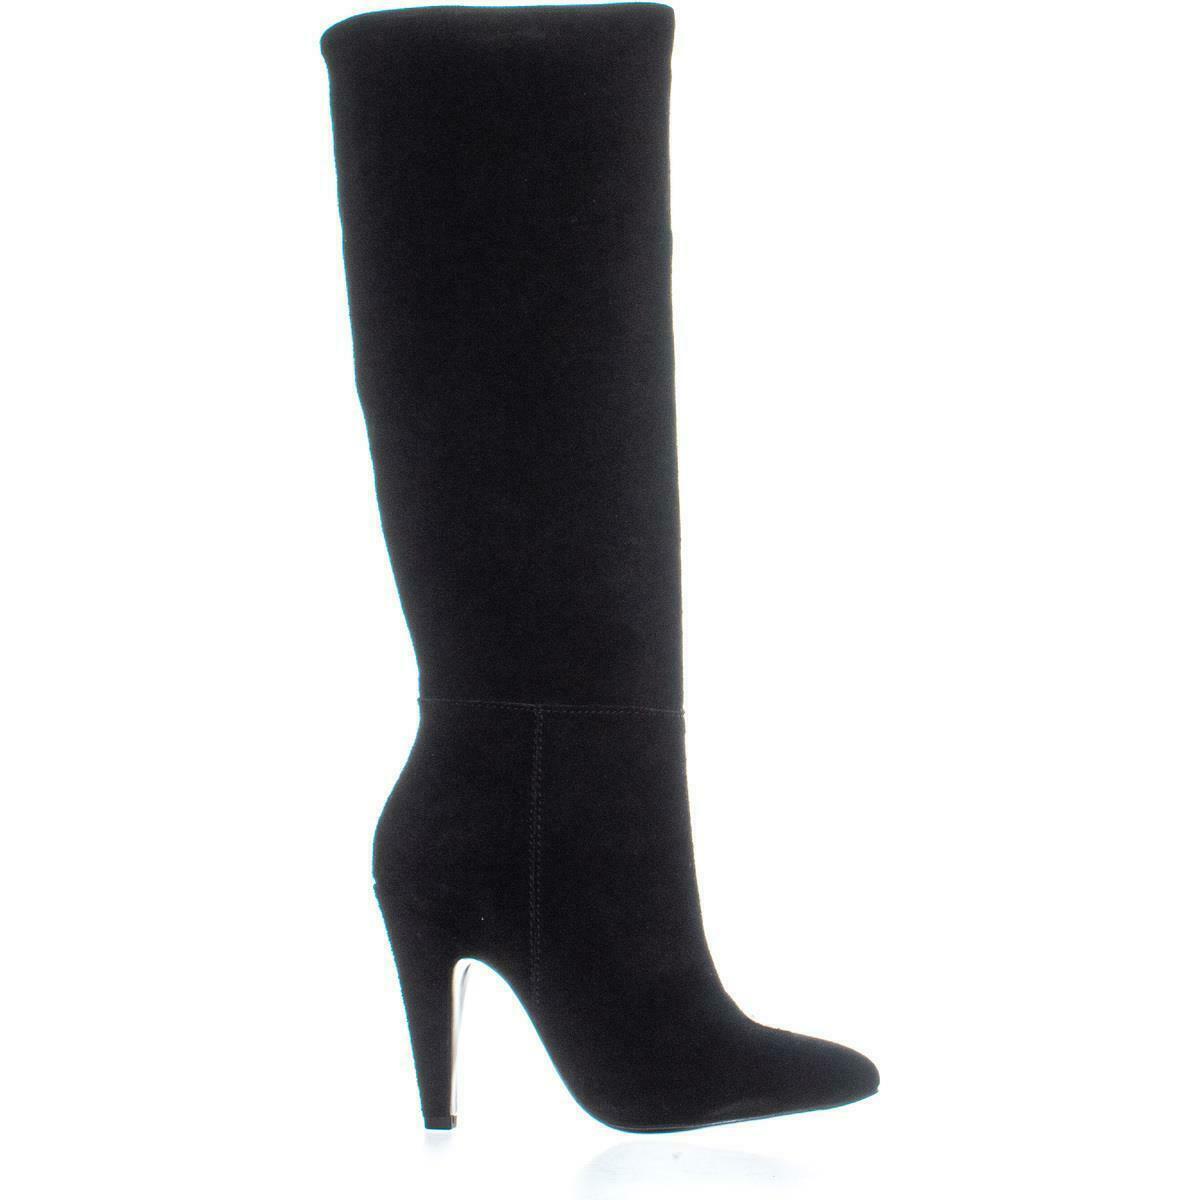 Steve Madden Sienah Slouch Knee-High Boots 436, Black Suede, 5.5 US - Boots